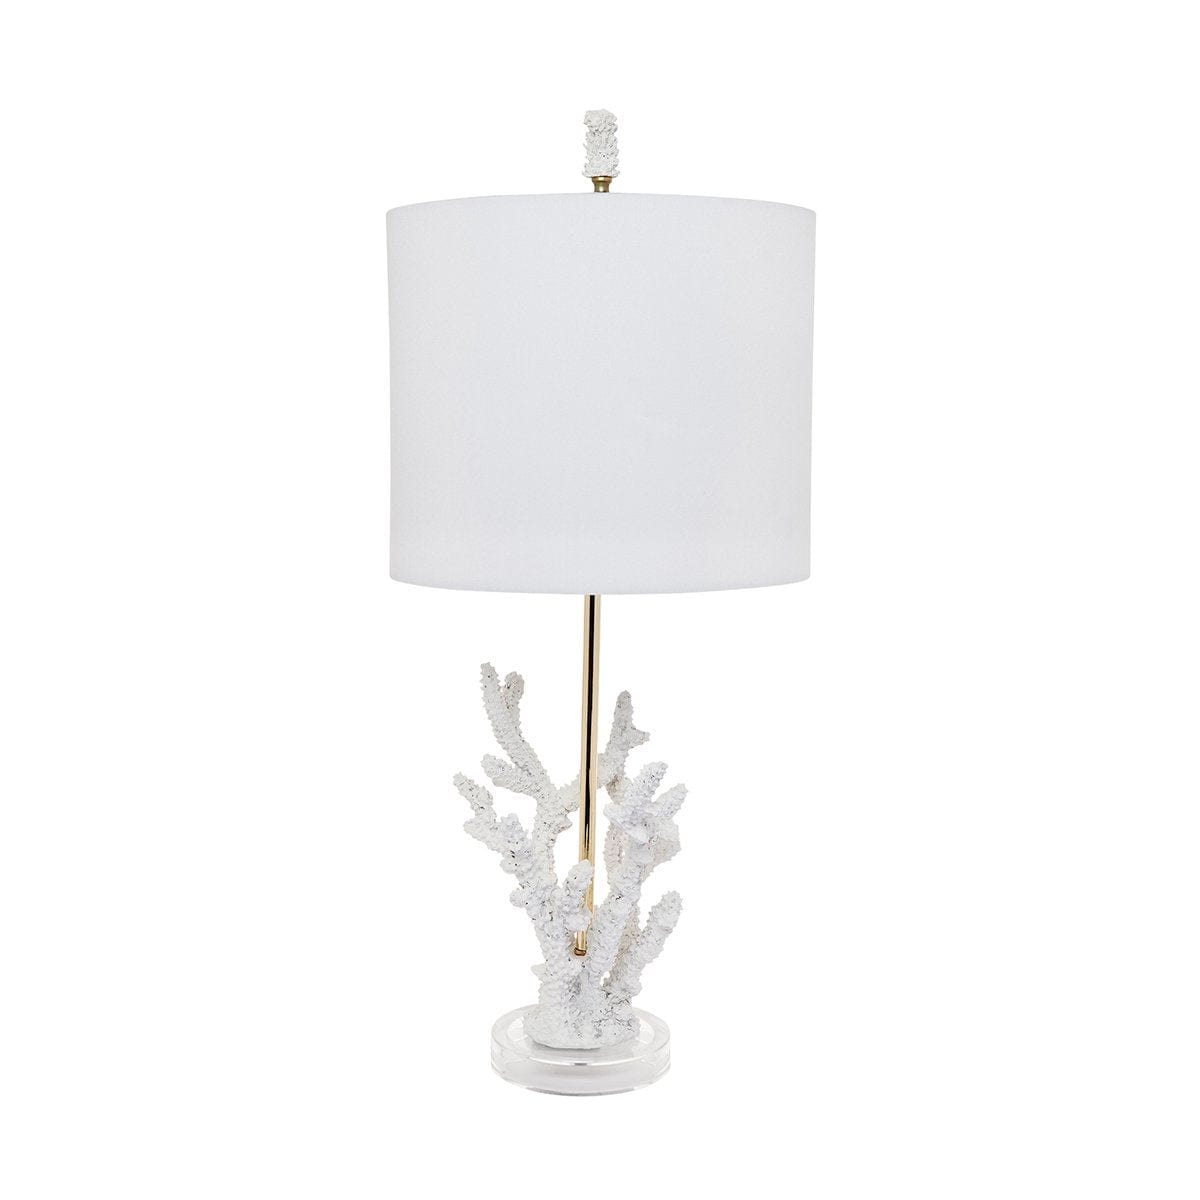 CAFE LIGHTING & LIVING Table Lamp Daphne Table Lamp 11566